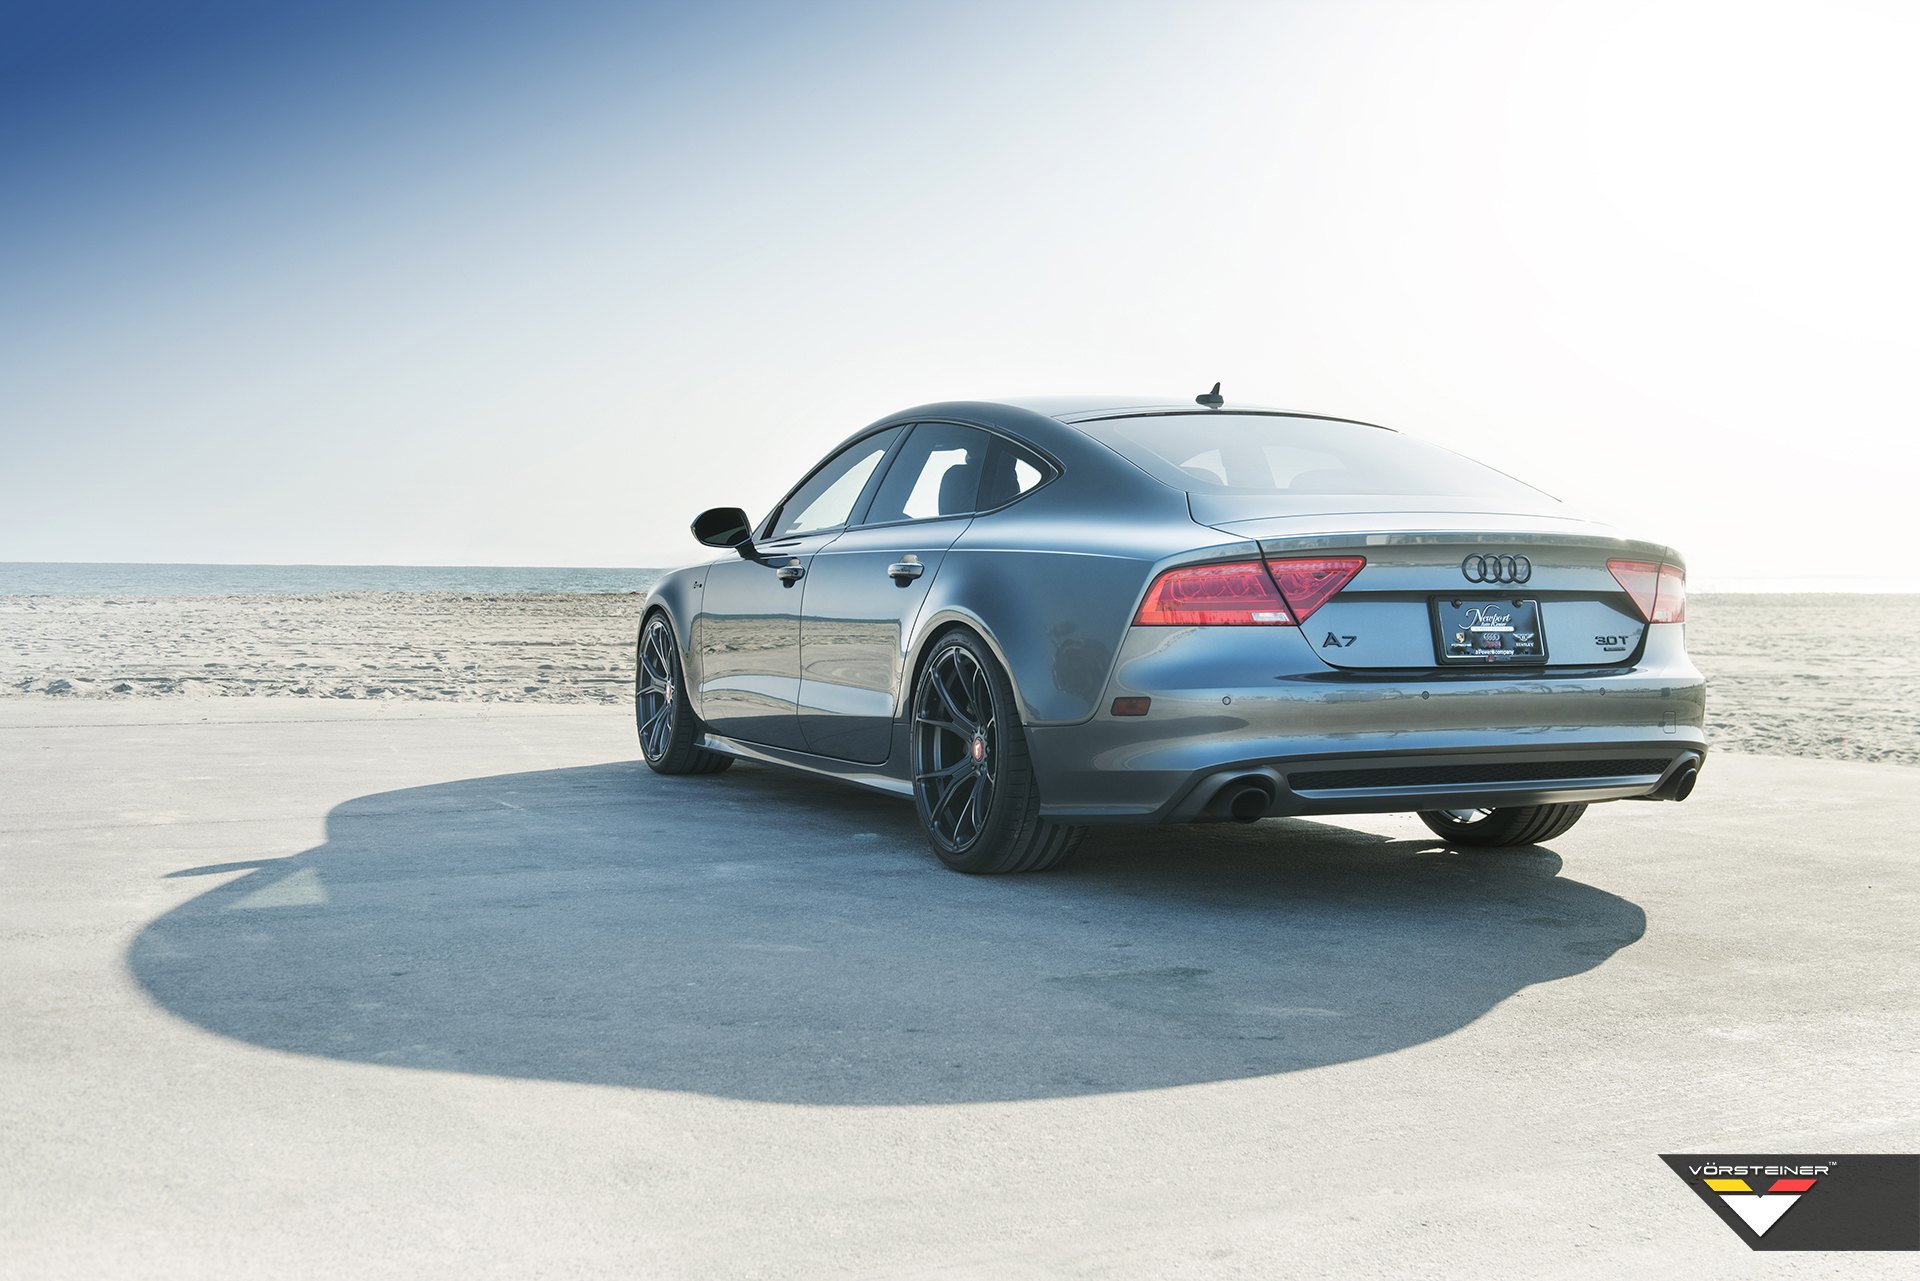 Custom Rear Diffuser on Gray Audi A7 3.0T - Photo by Vorstiner